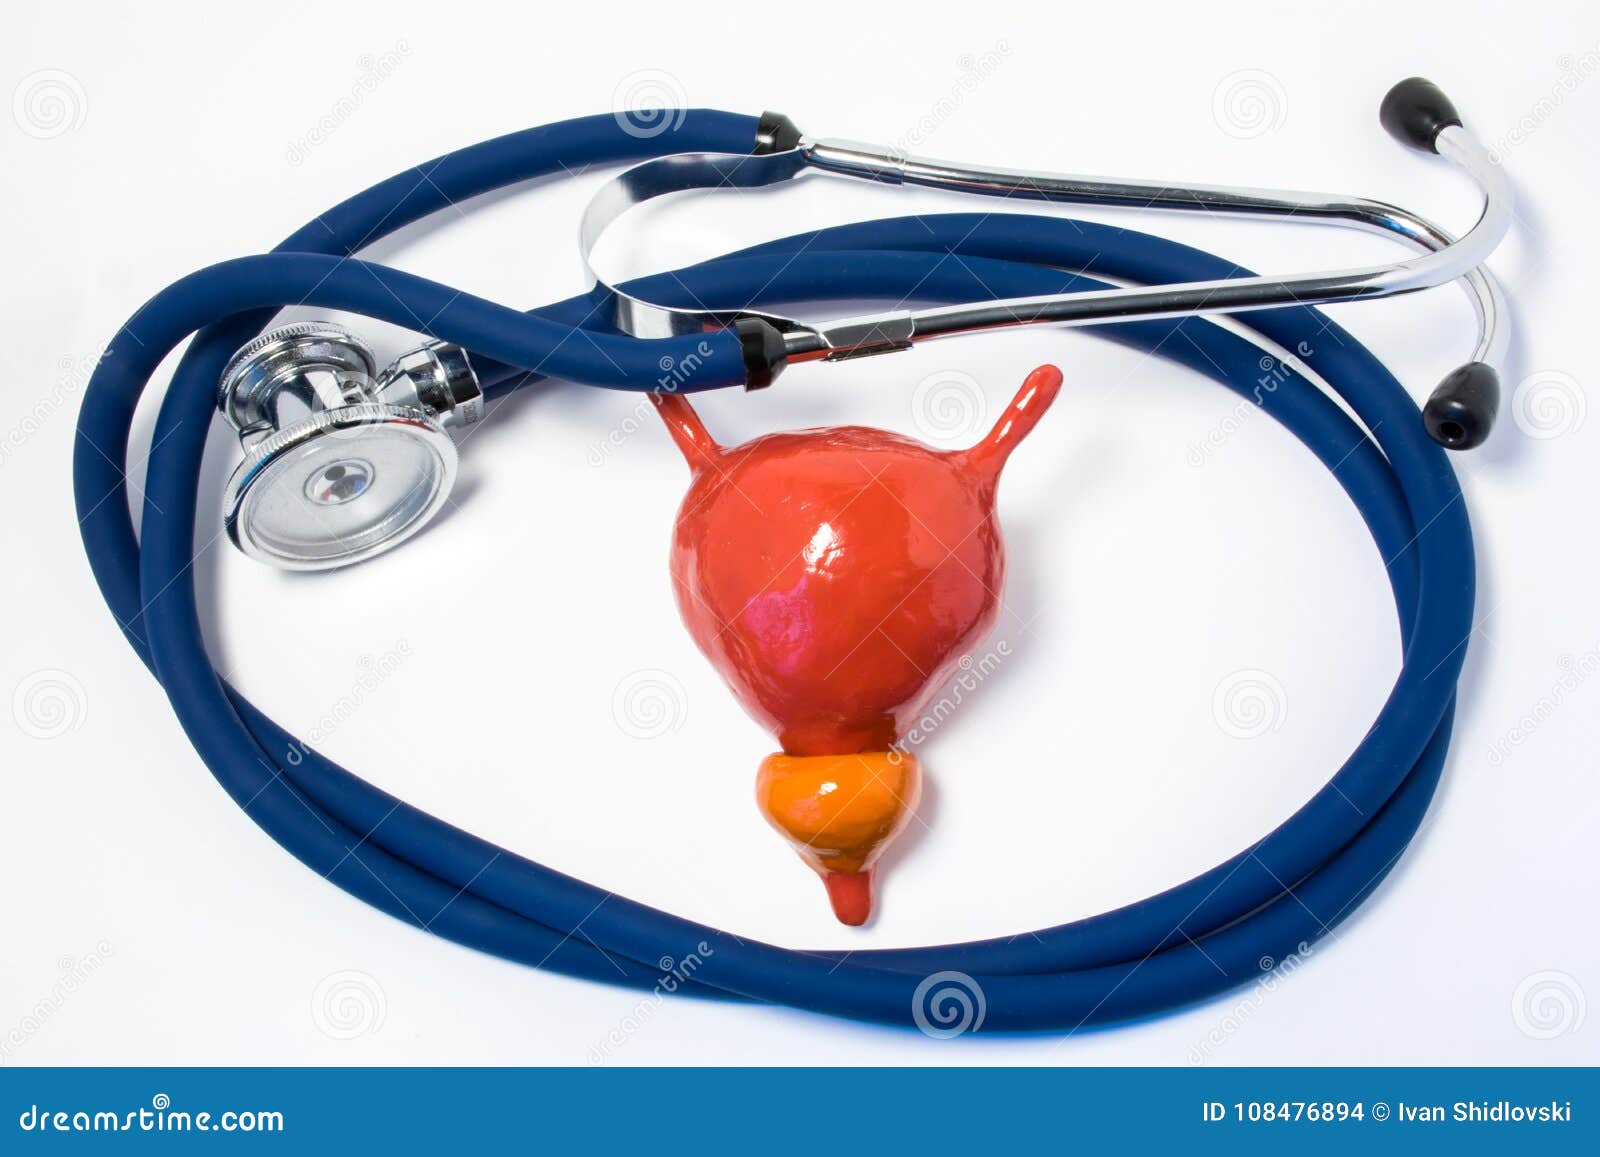 bladder and prostate care and protection. medical stethoscope folded into ring, surround bladder prostate, izing care, prote